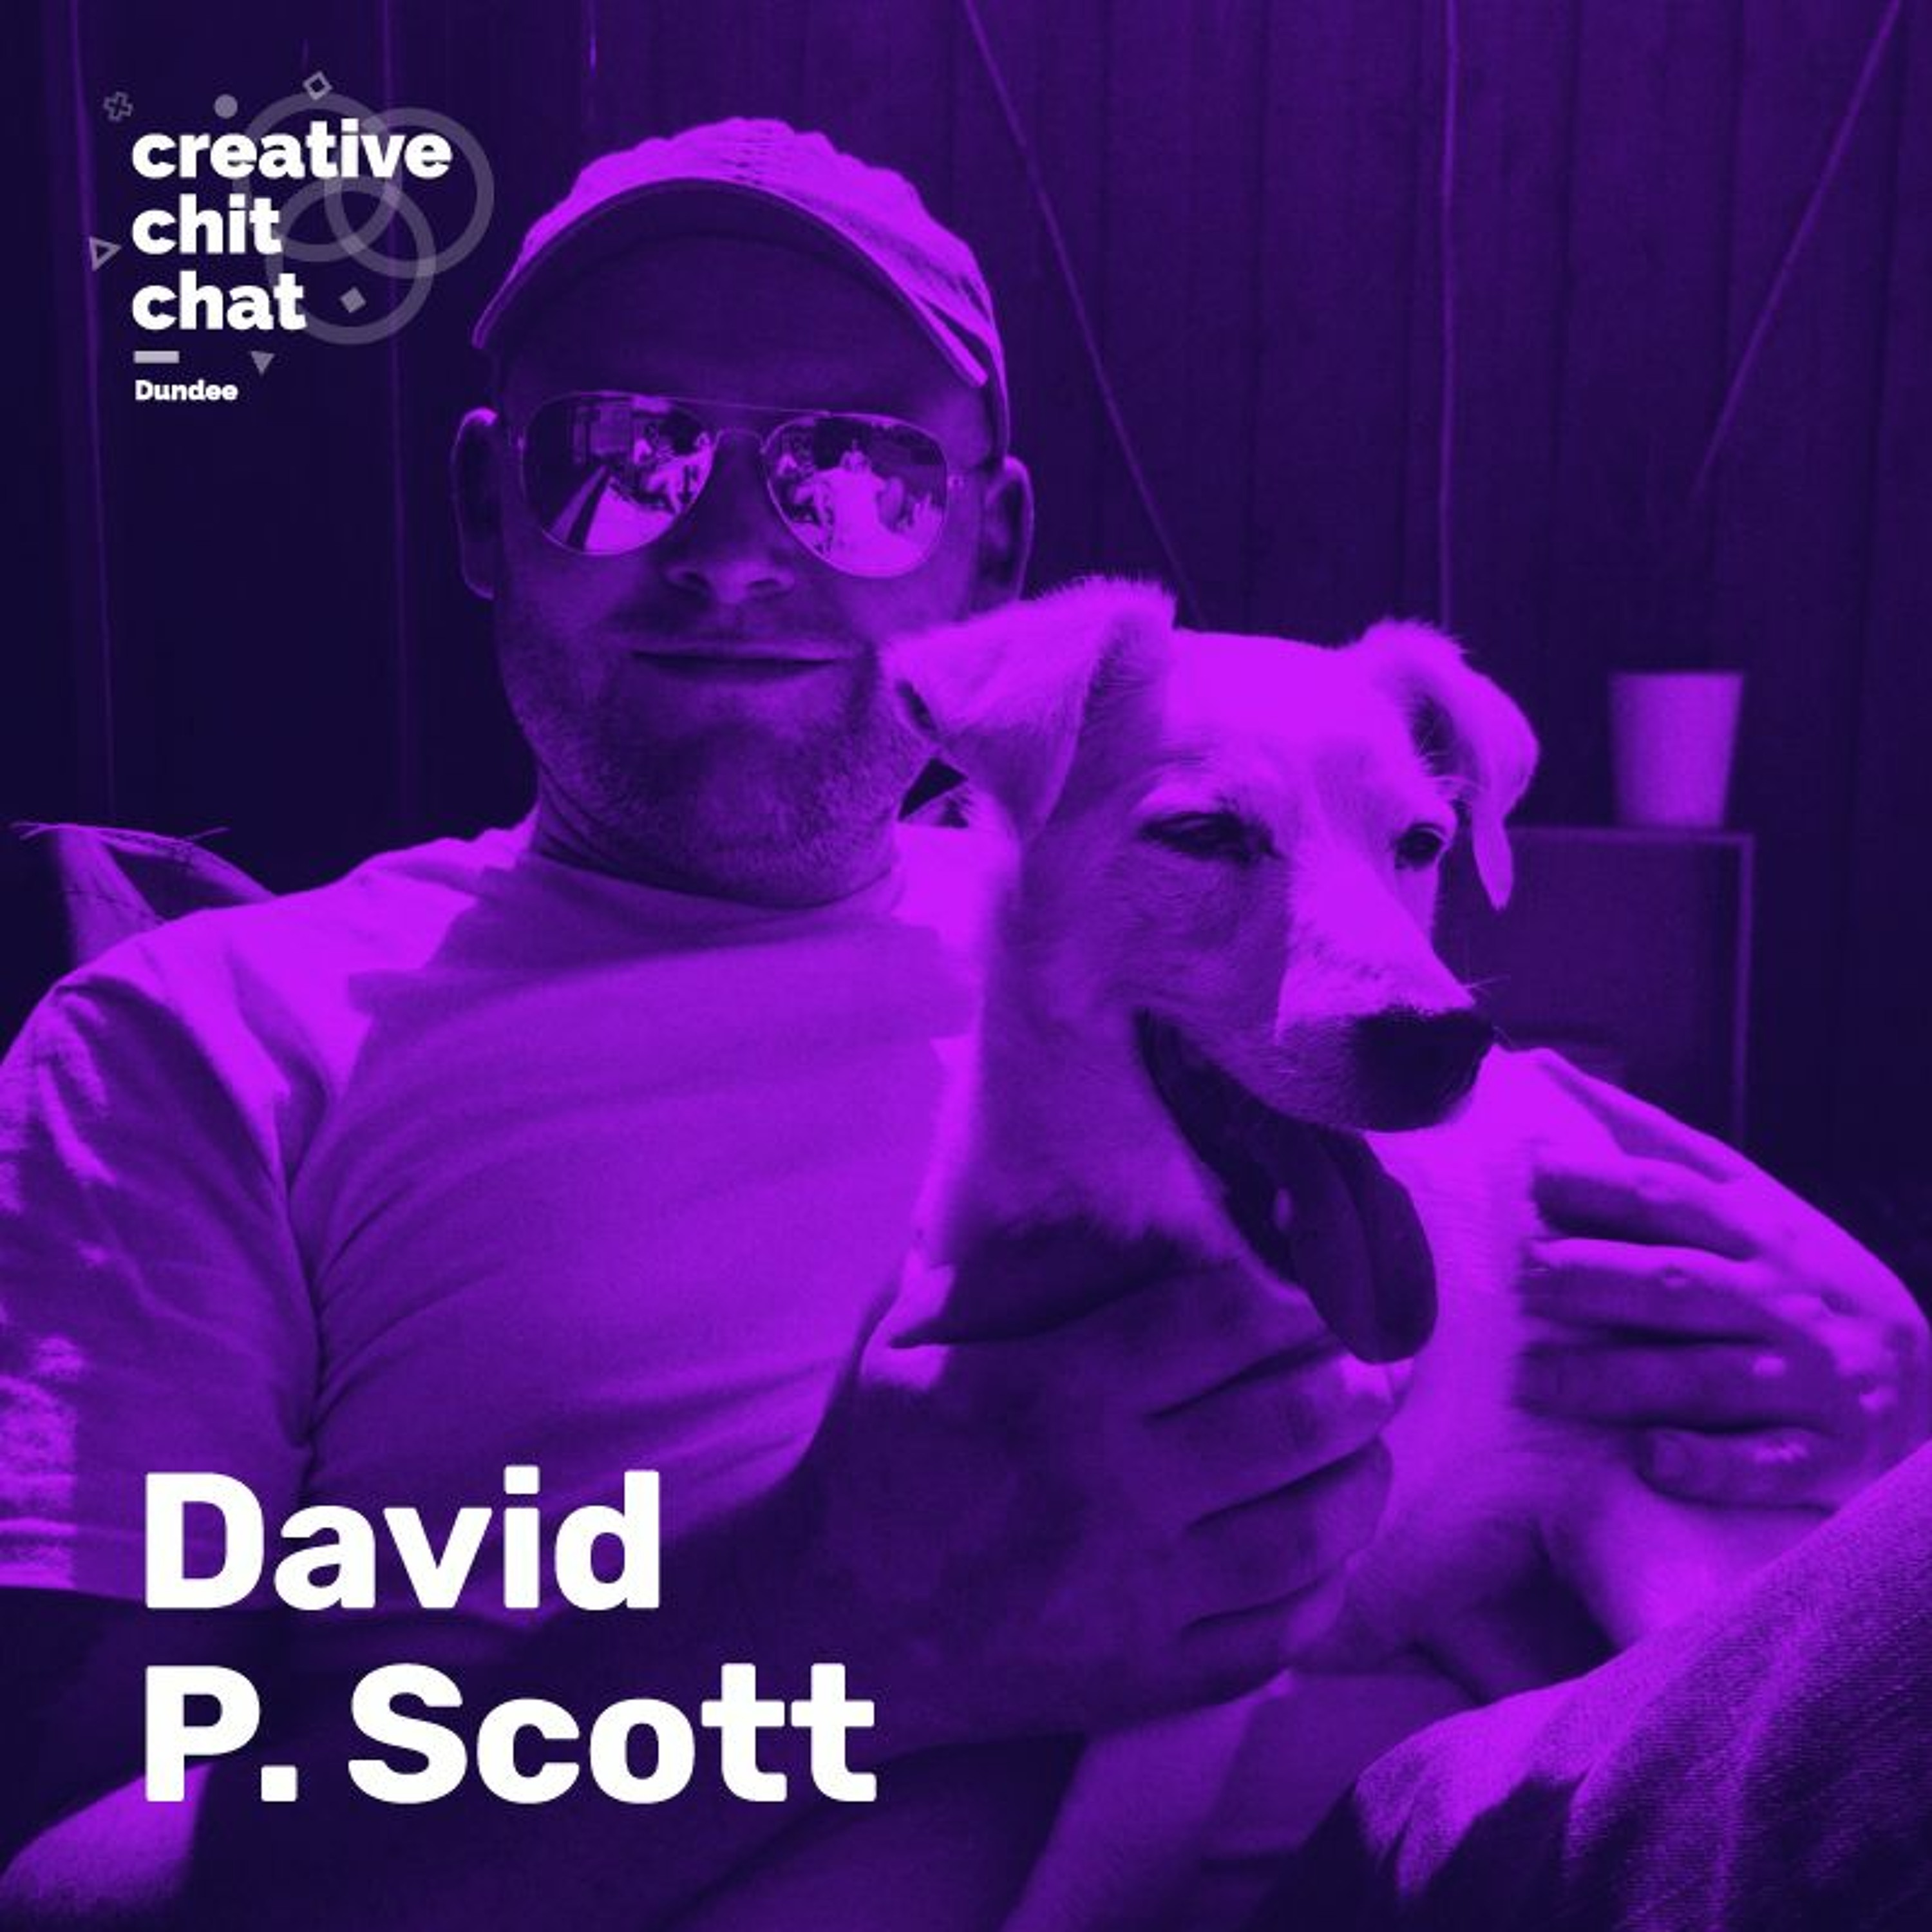 David P. Scott - When your back’s against a sheer drop, where else do you go?